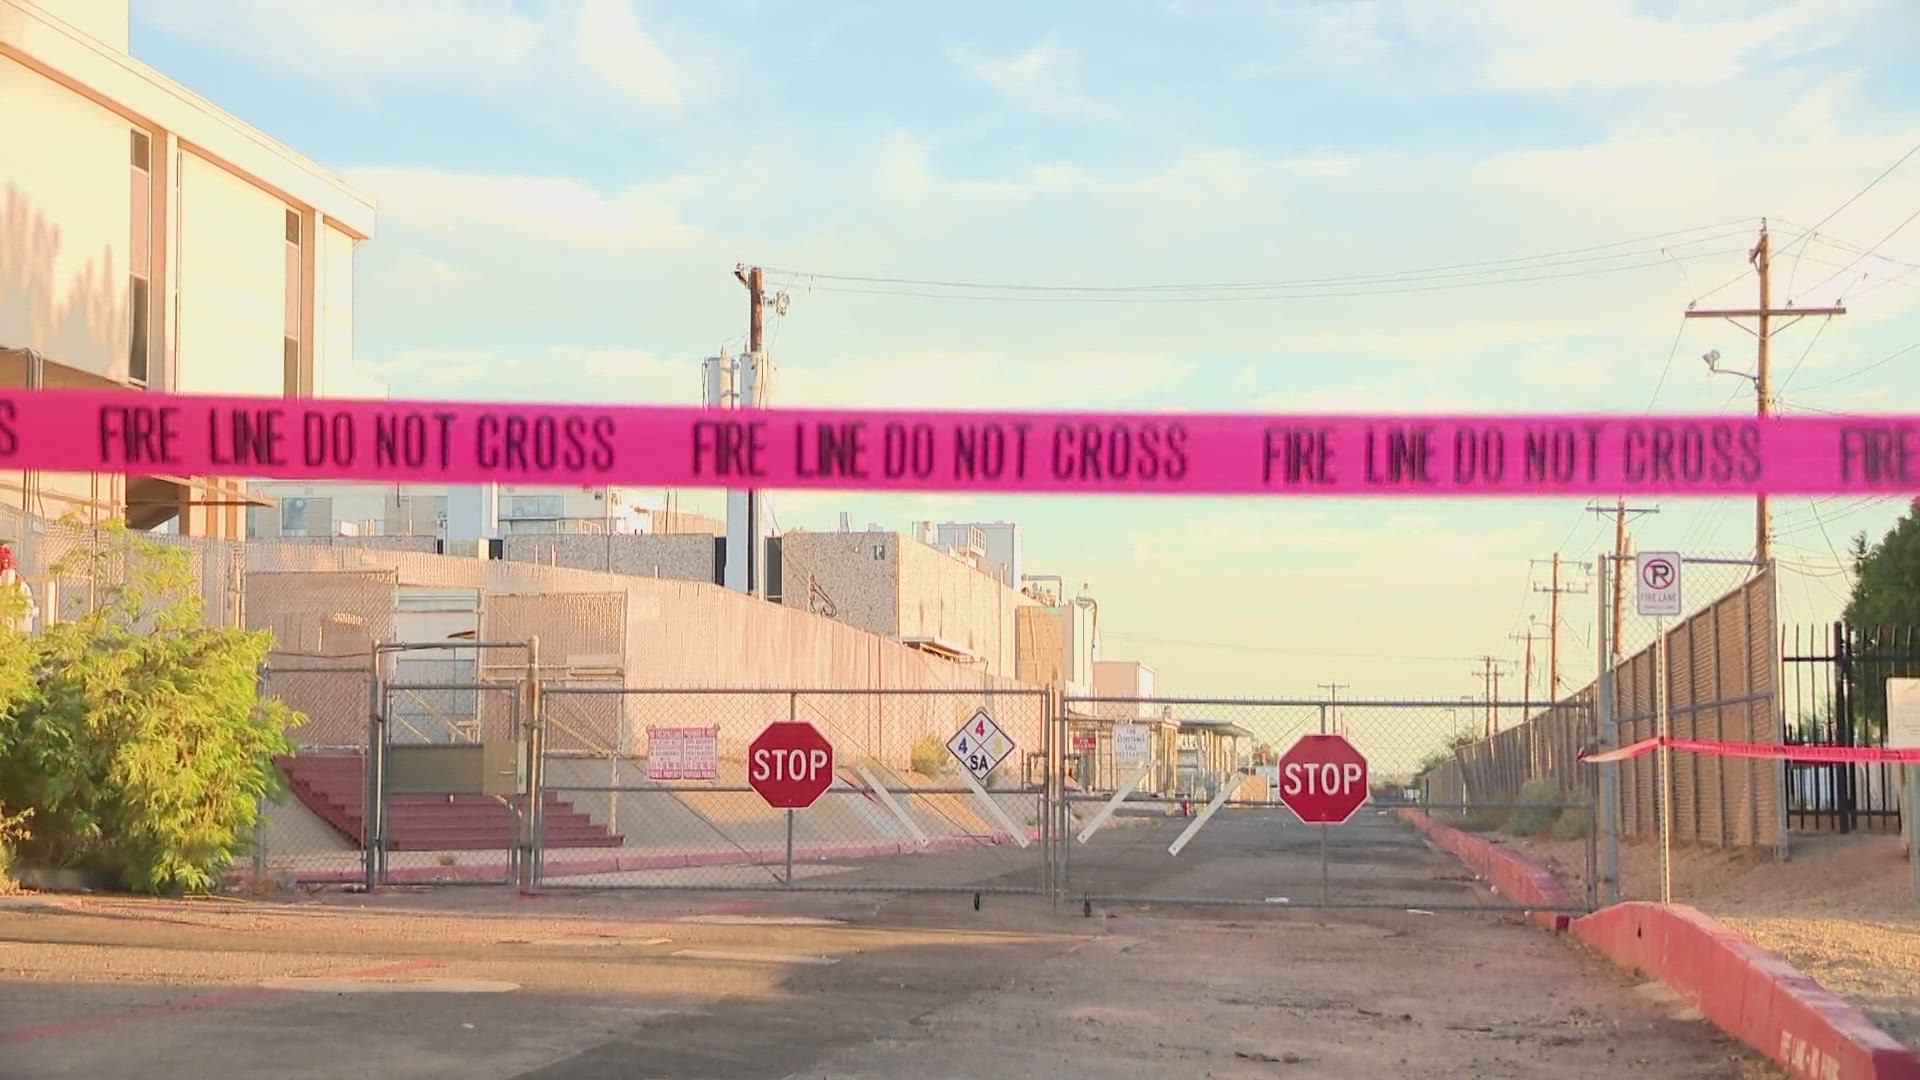 There are dozens of highly contaminated areas called superfund sites across the state of Arizona.